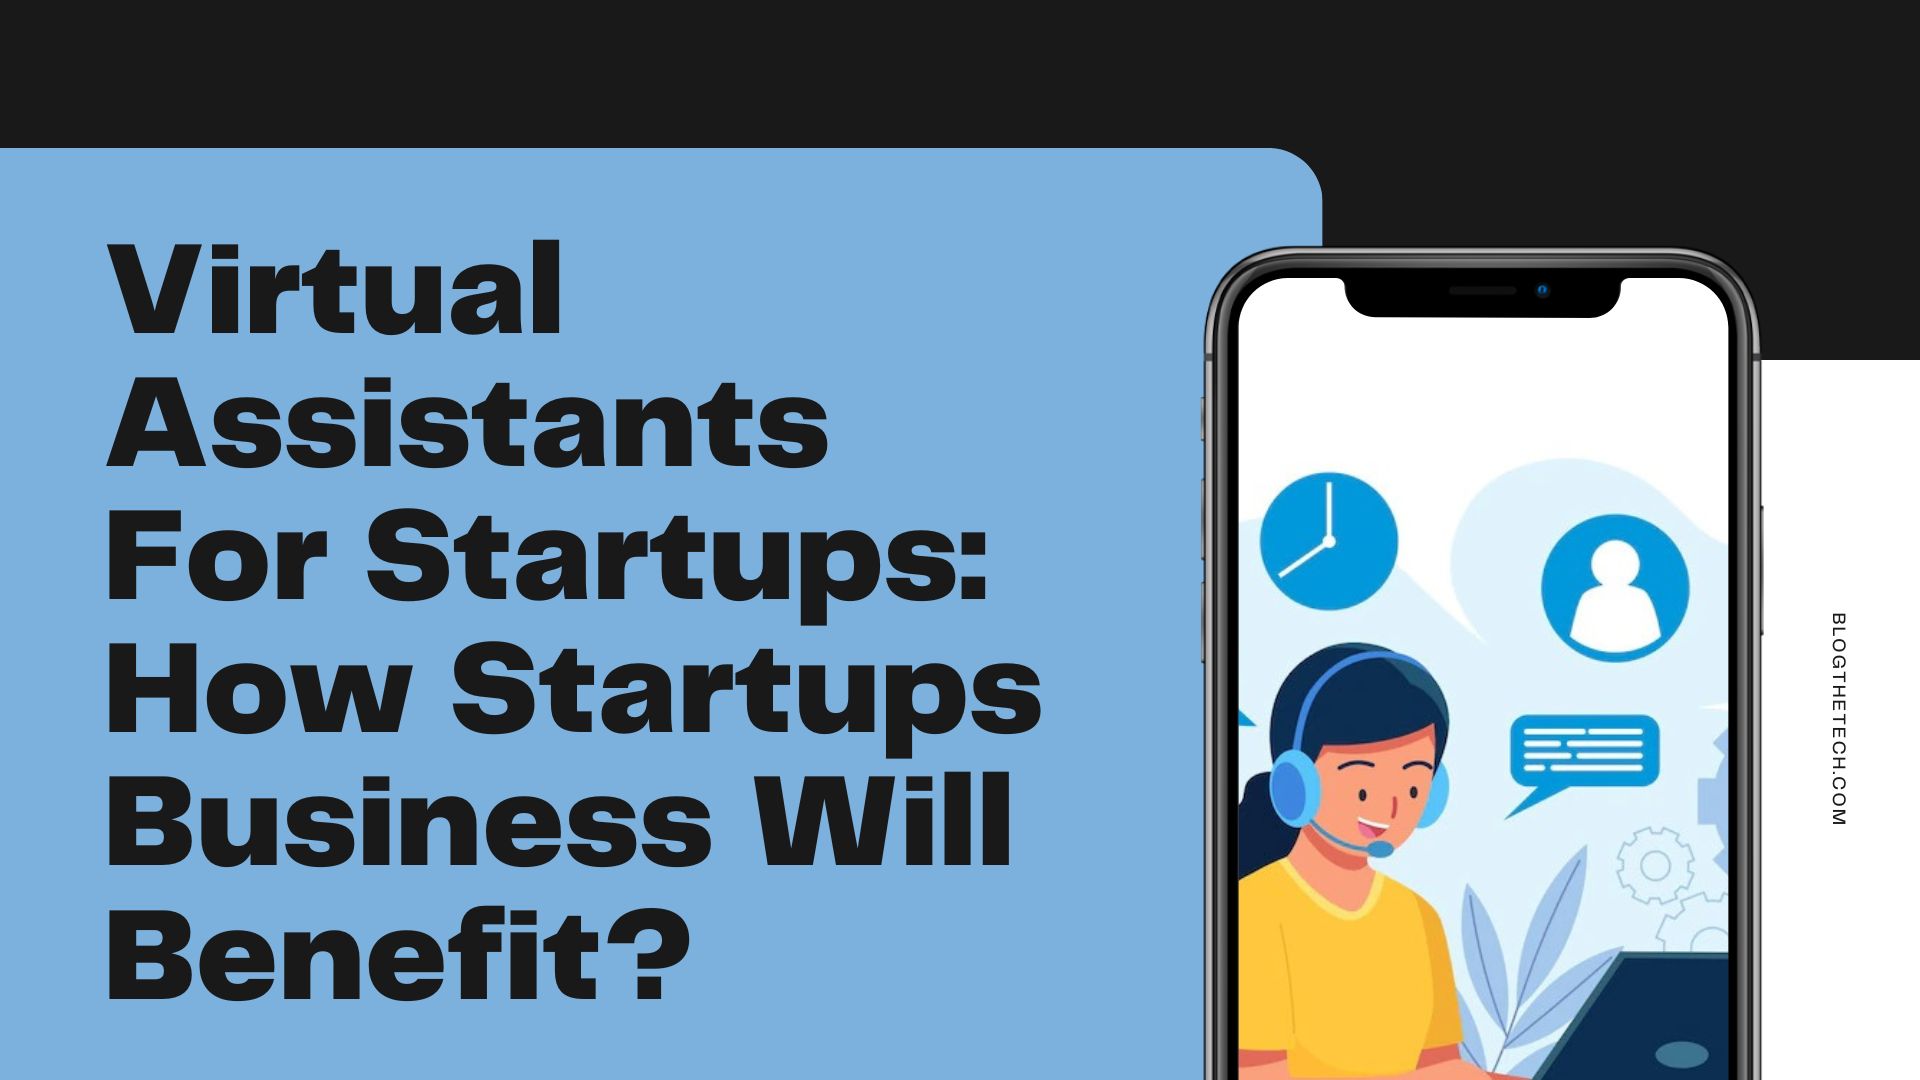 Virtual Assistants For Startups: How Startups Business Will Benefit?